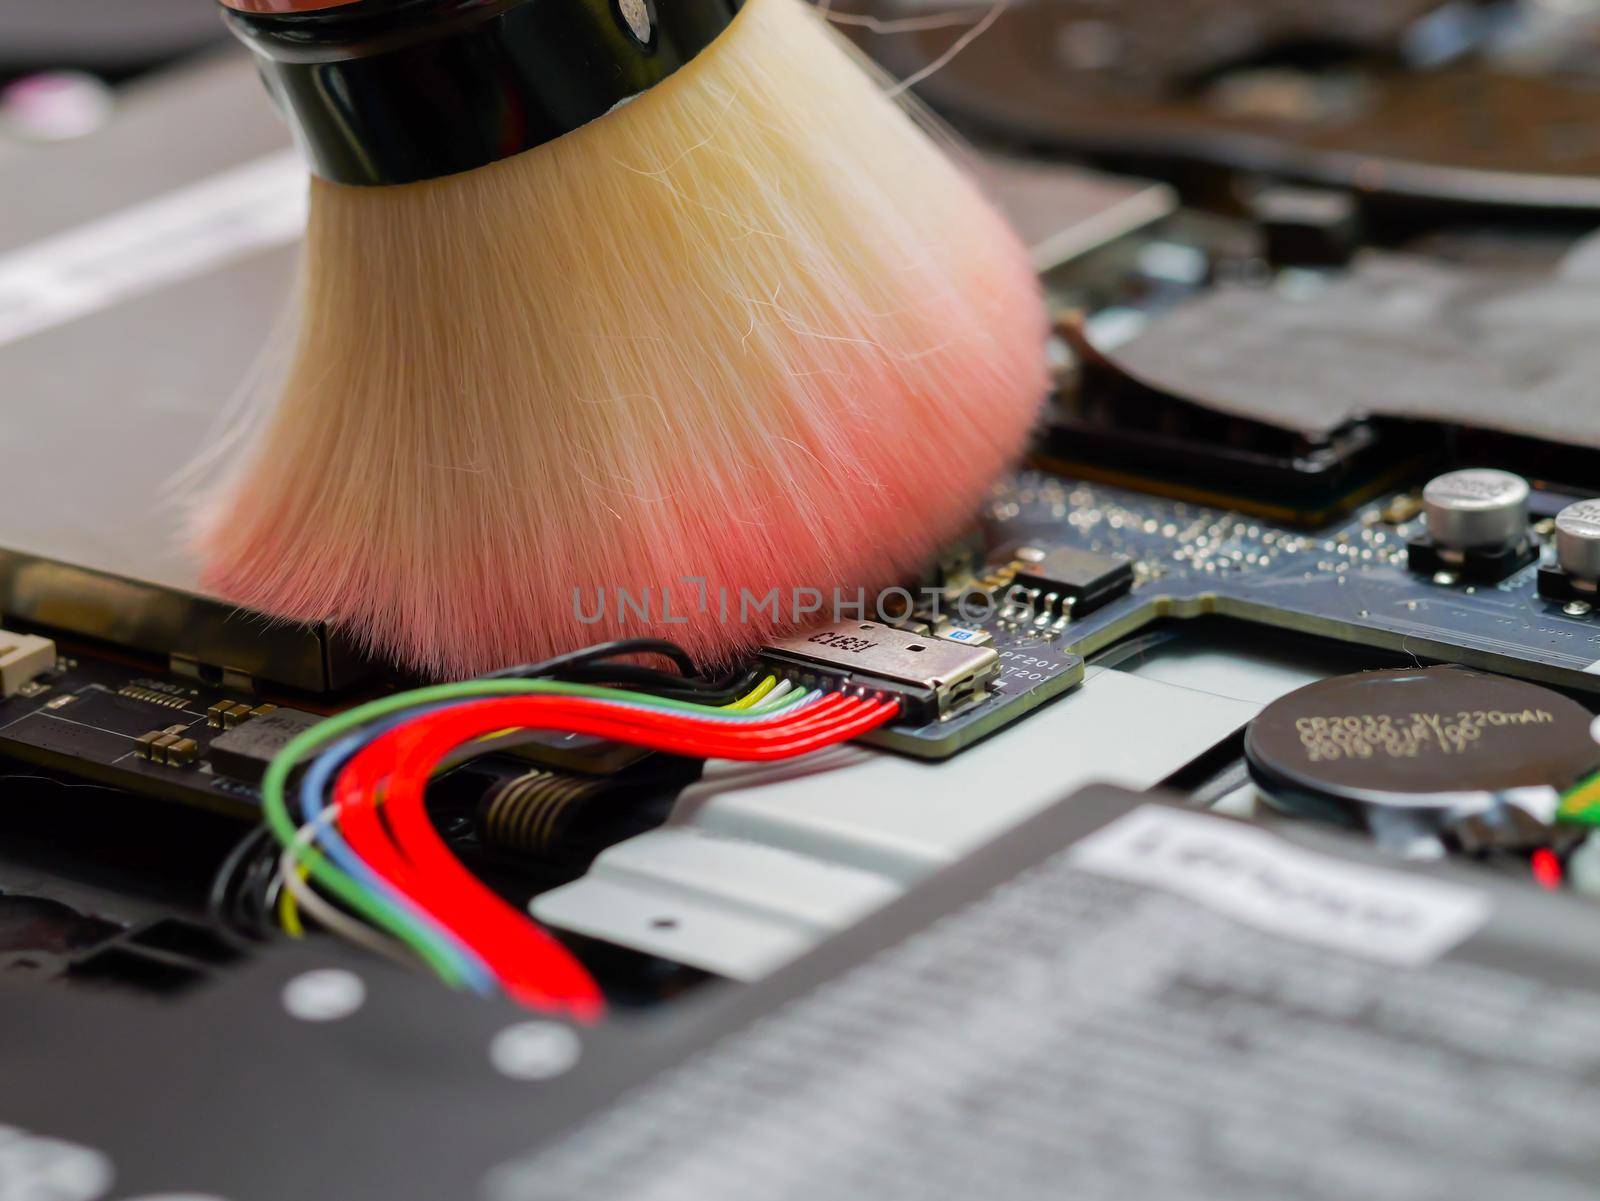 Cleaning a laptop and removing the dust with brush. by RecCameraStock